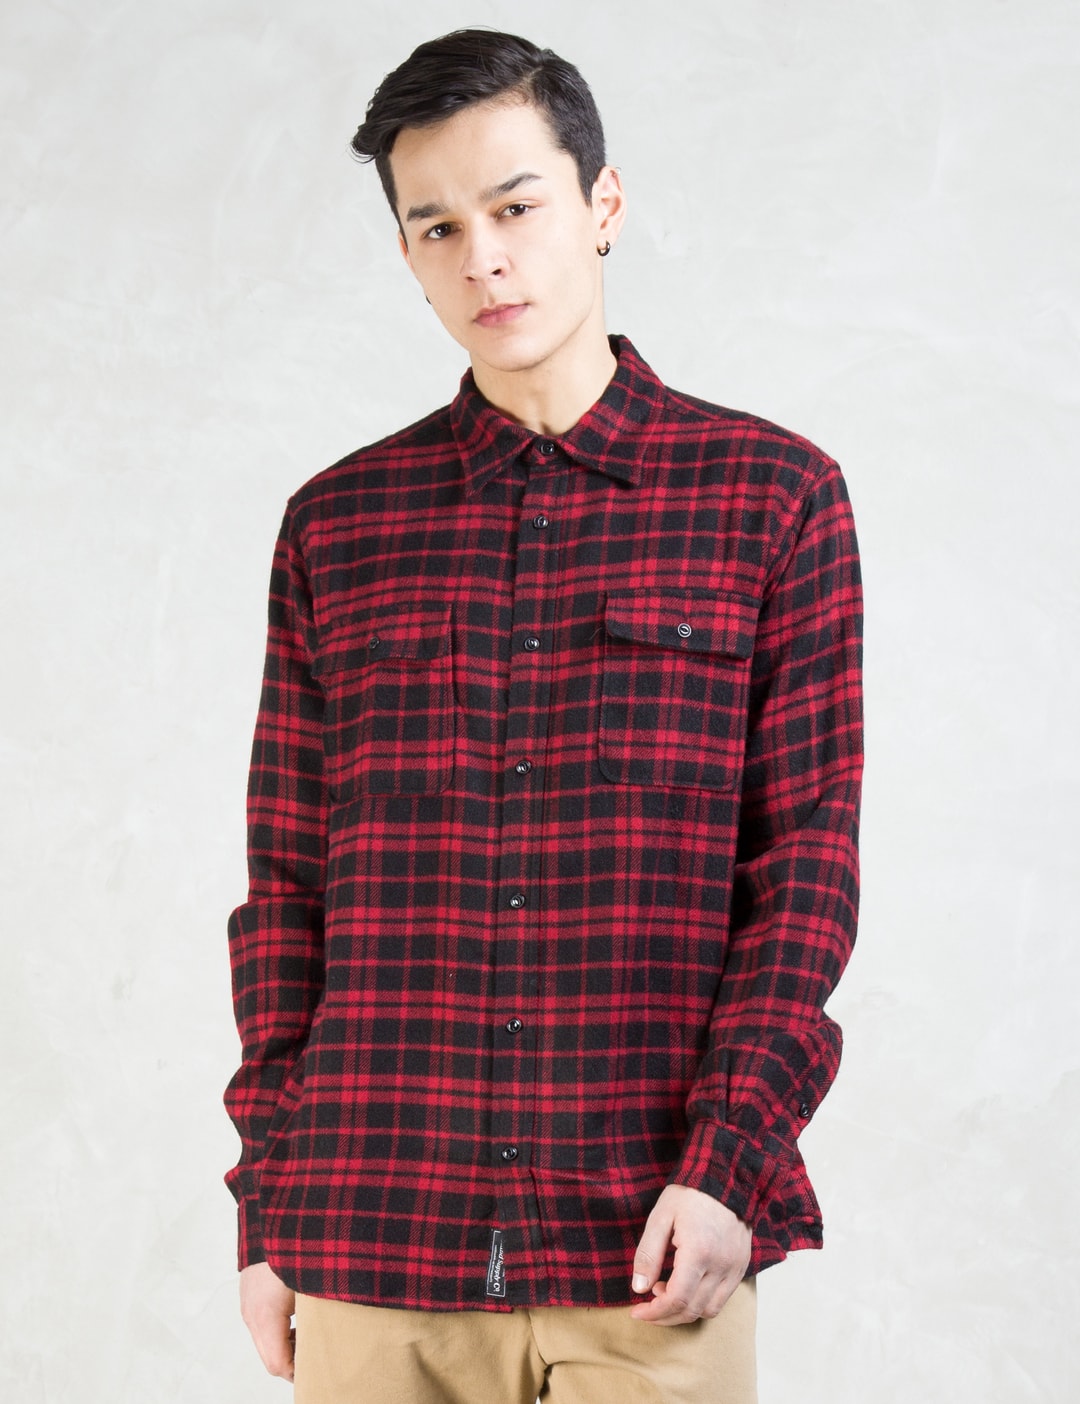 Diamond Supply Co. - Baker Flannel Shirt | HBX - Globally Curated ...